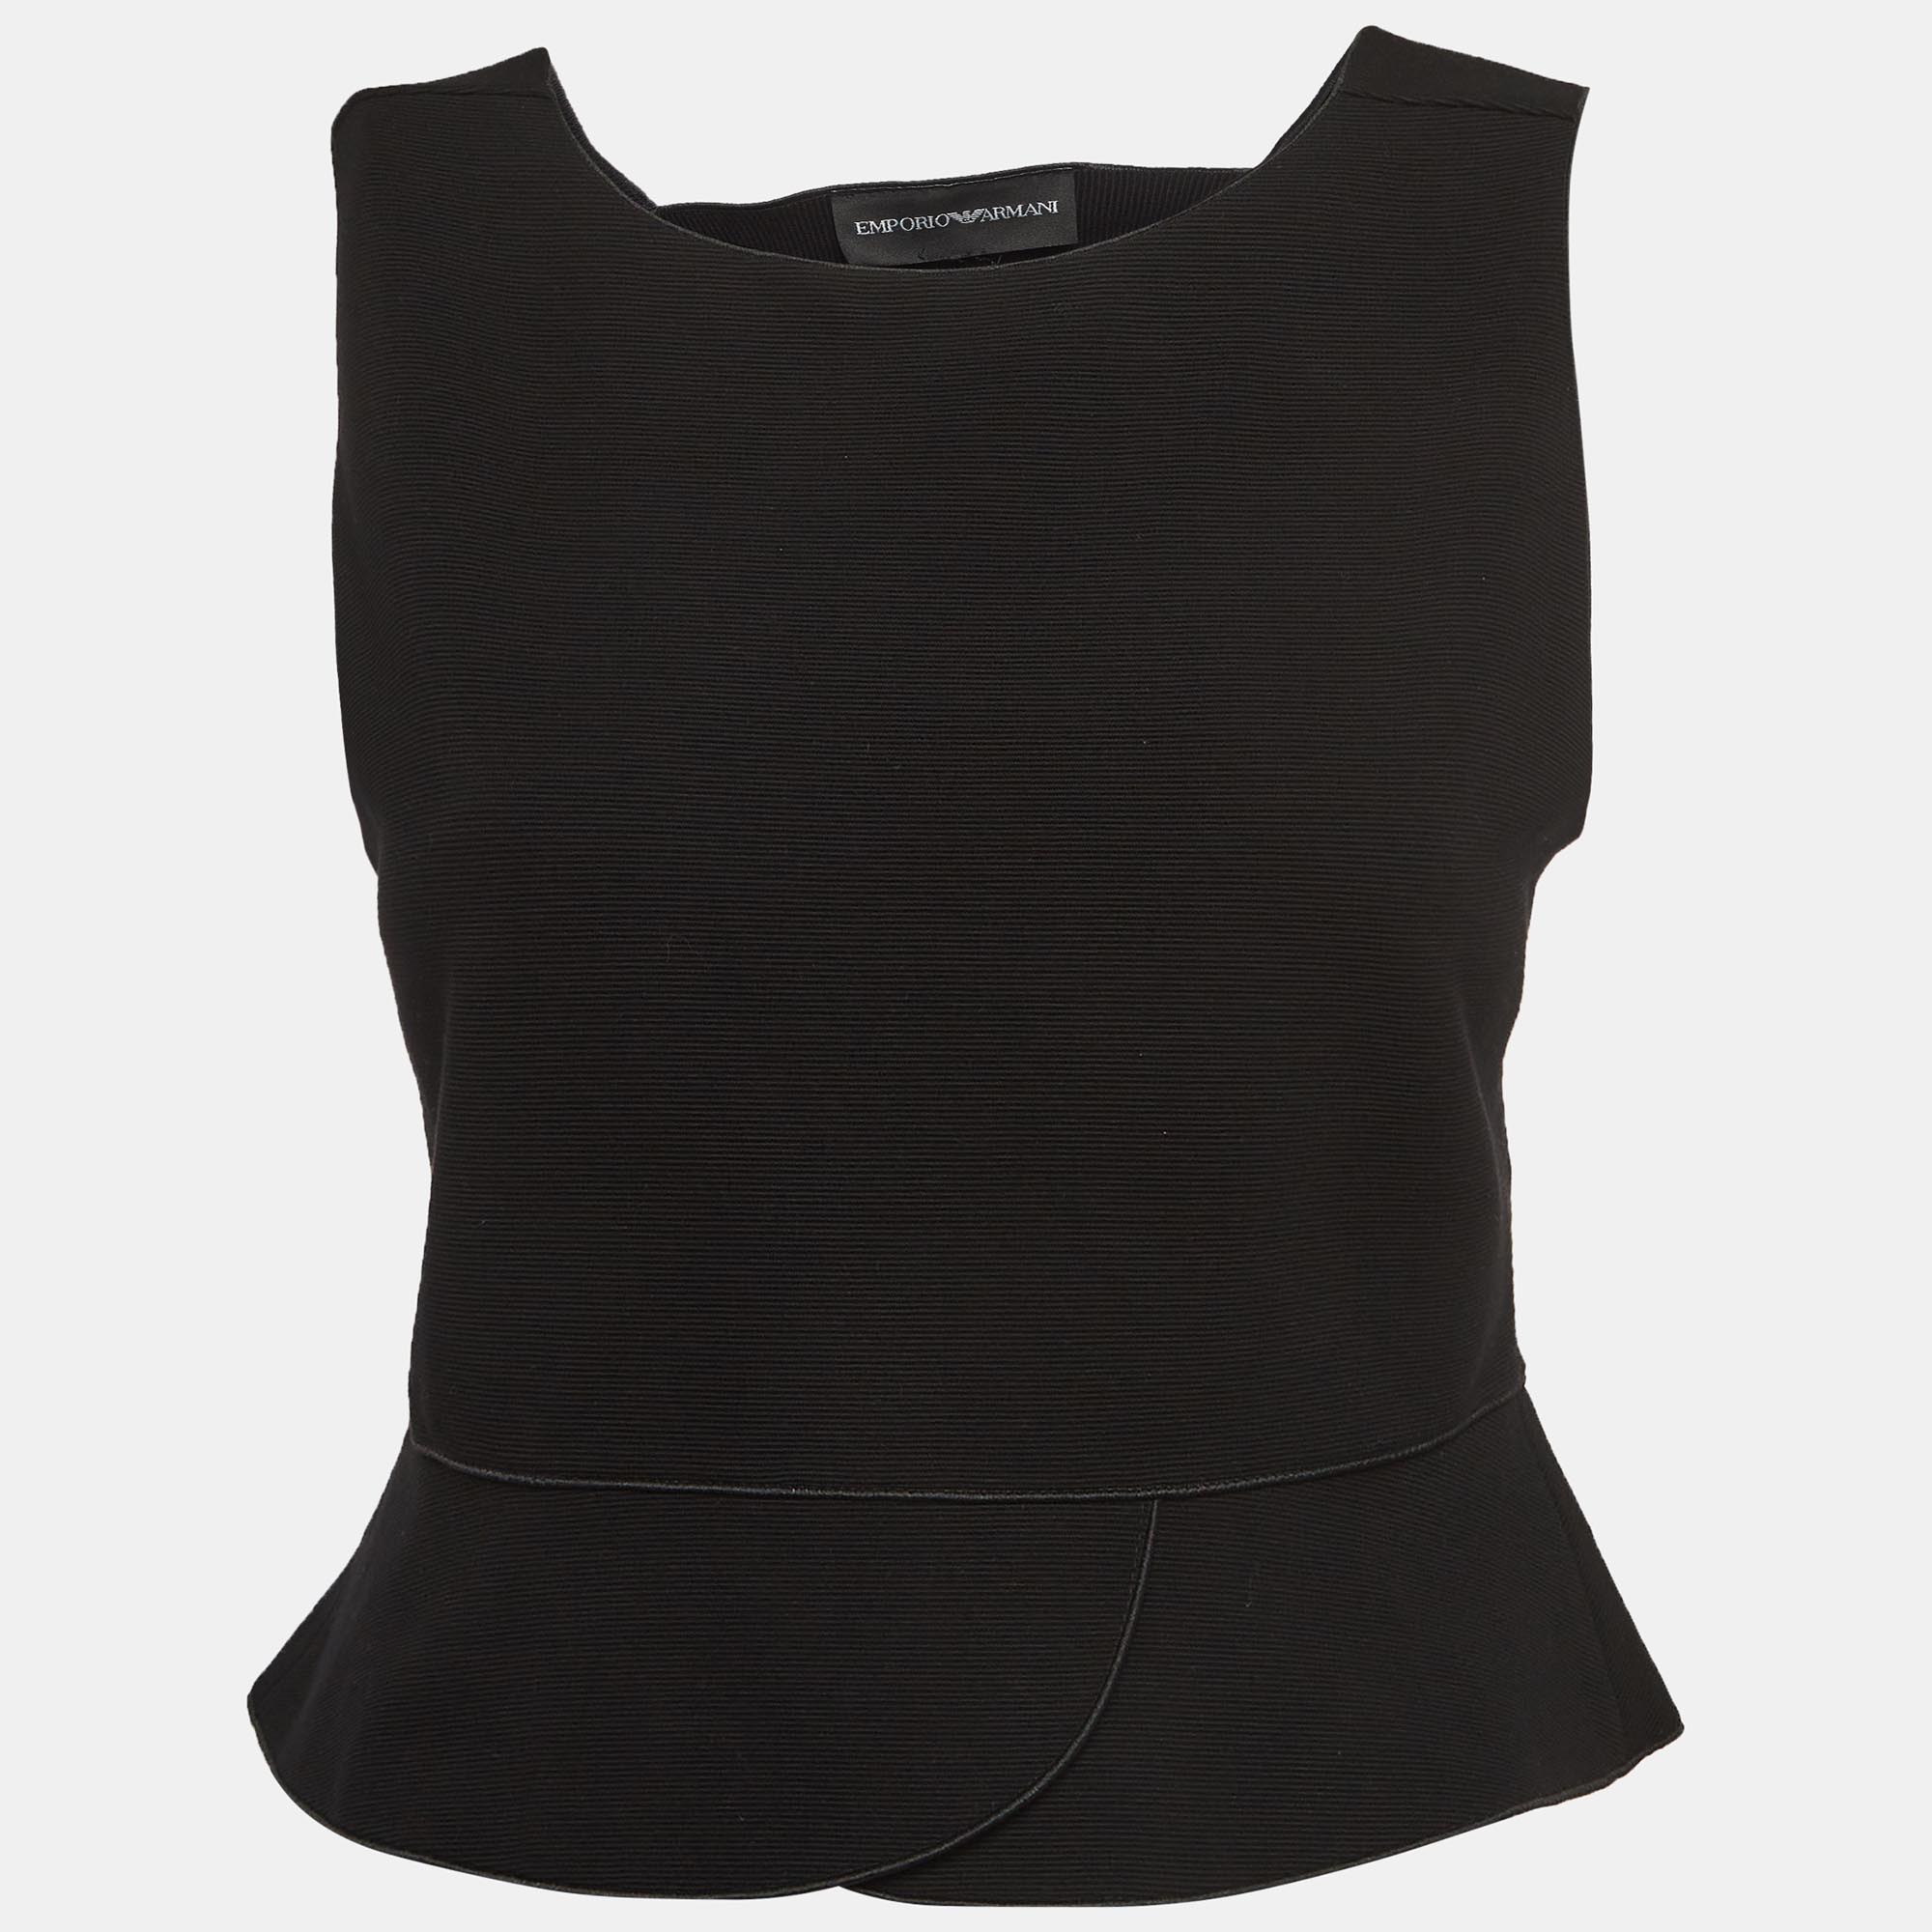 Emporio armani black knit sleeveless cut-out crop top m